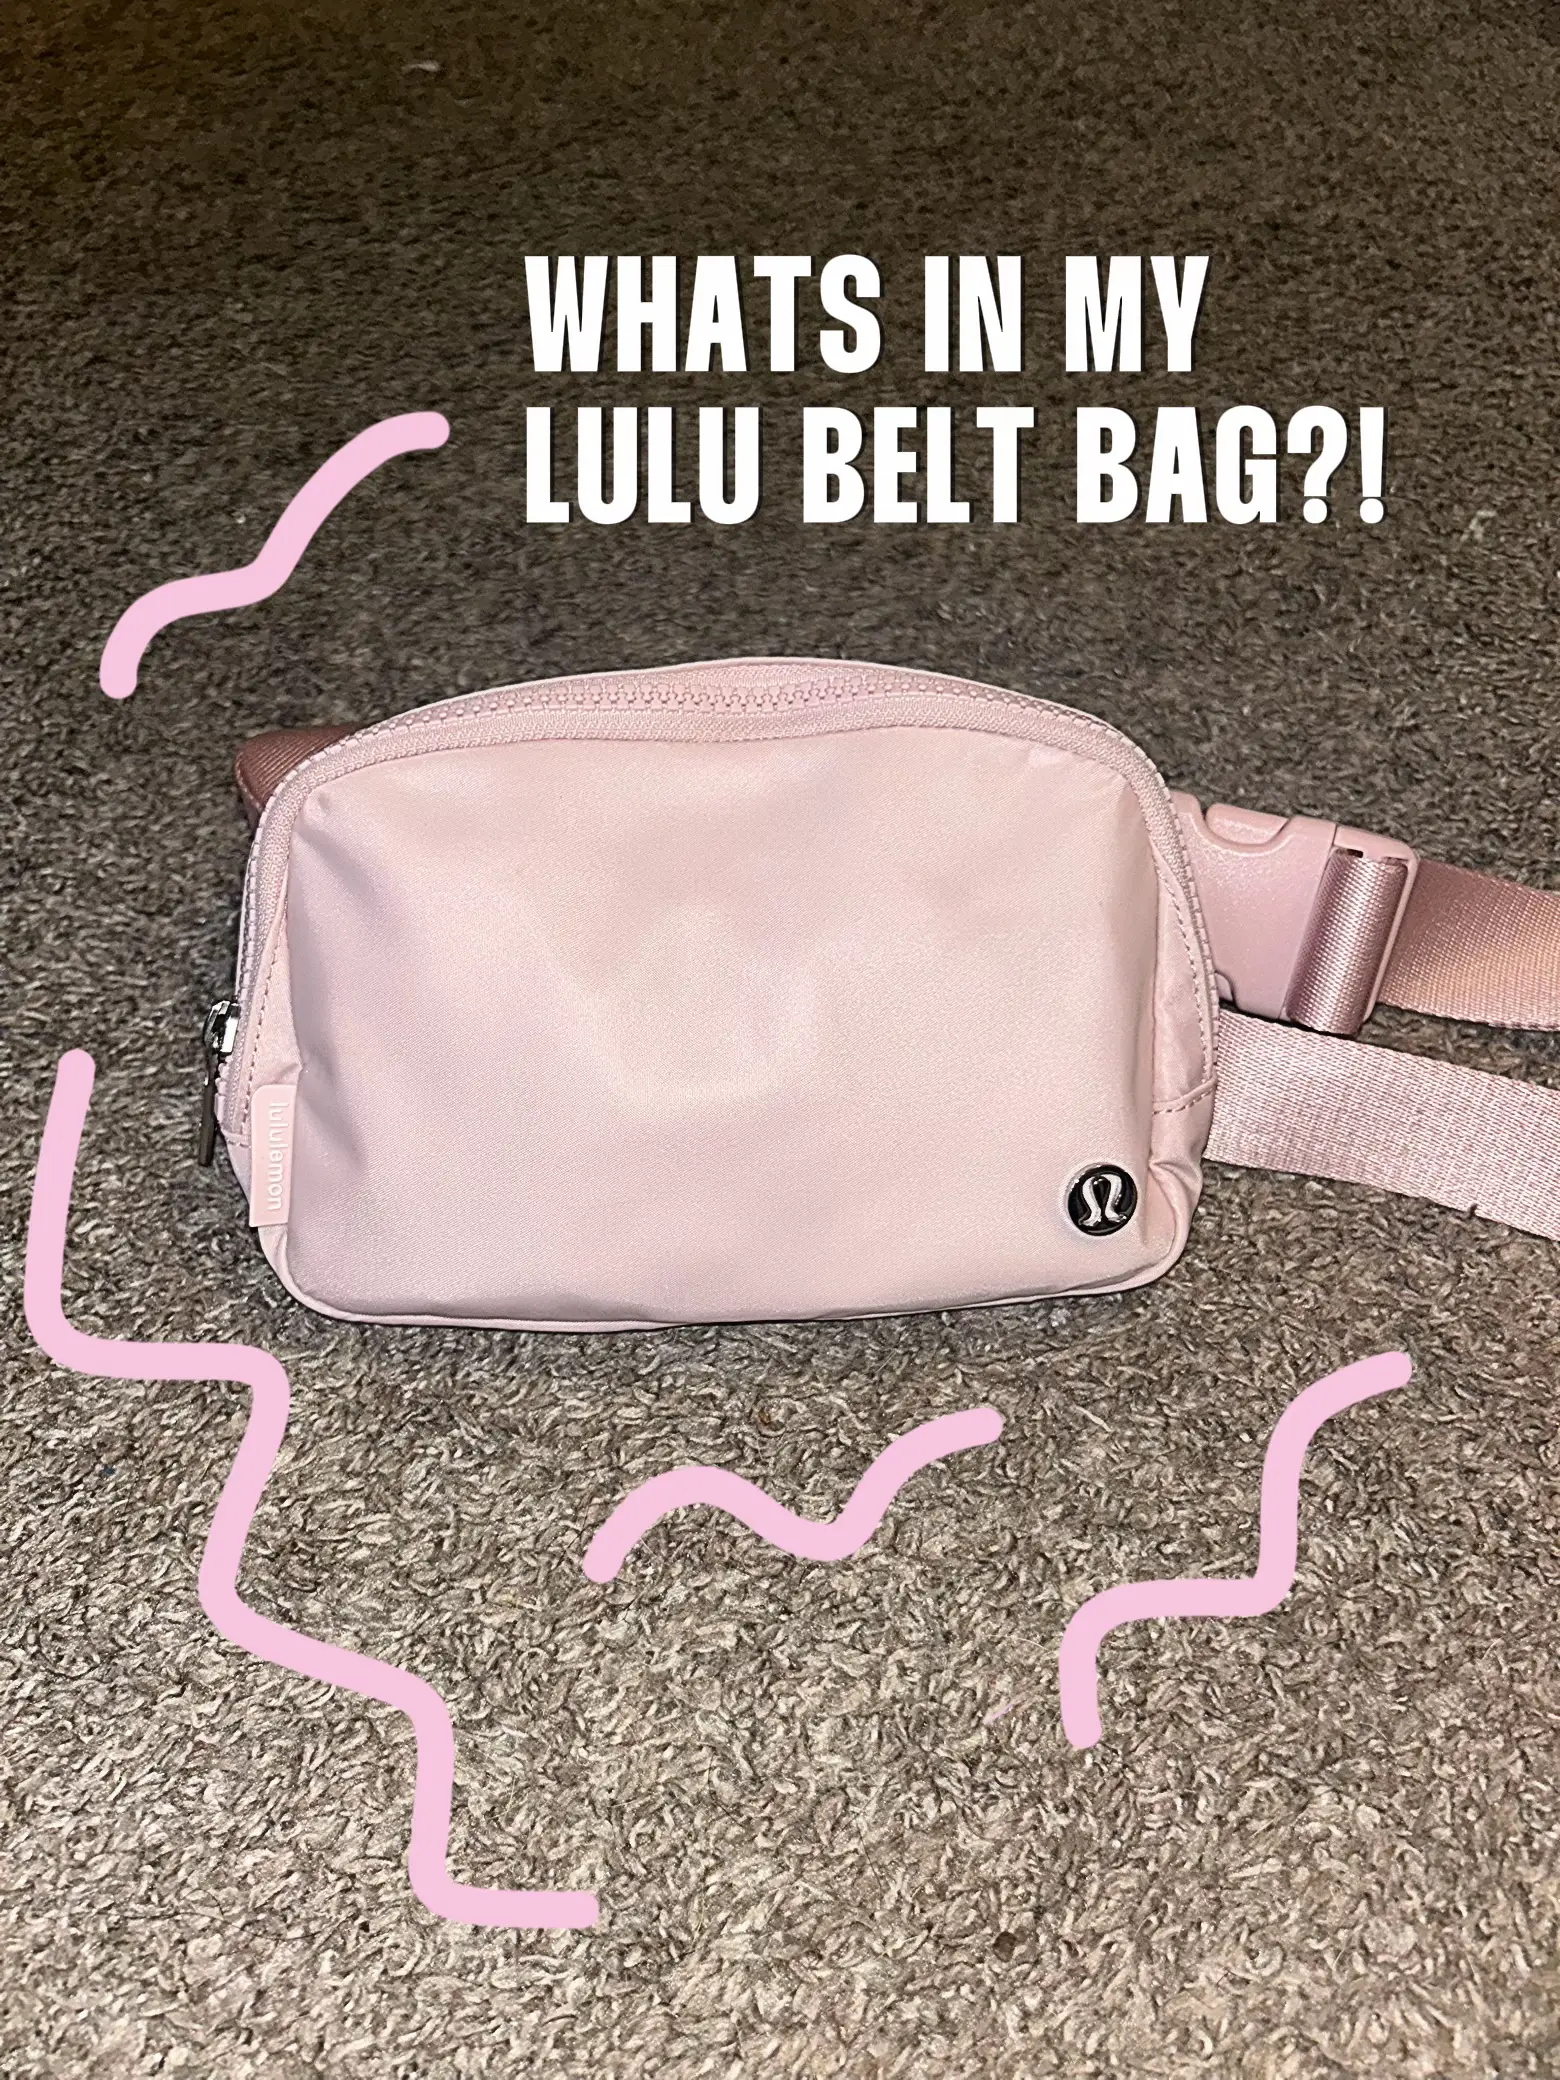 WHAT'S IN MY LULULEMON BELT BAG  Gallery posted by amanda marie